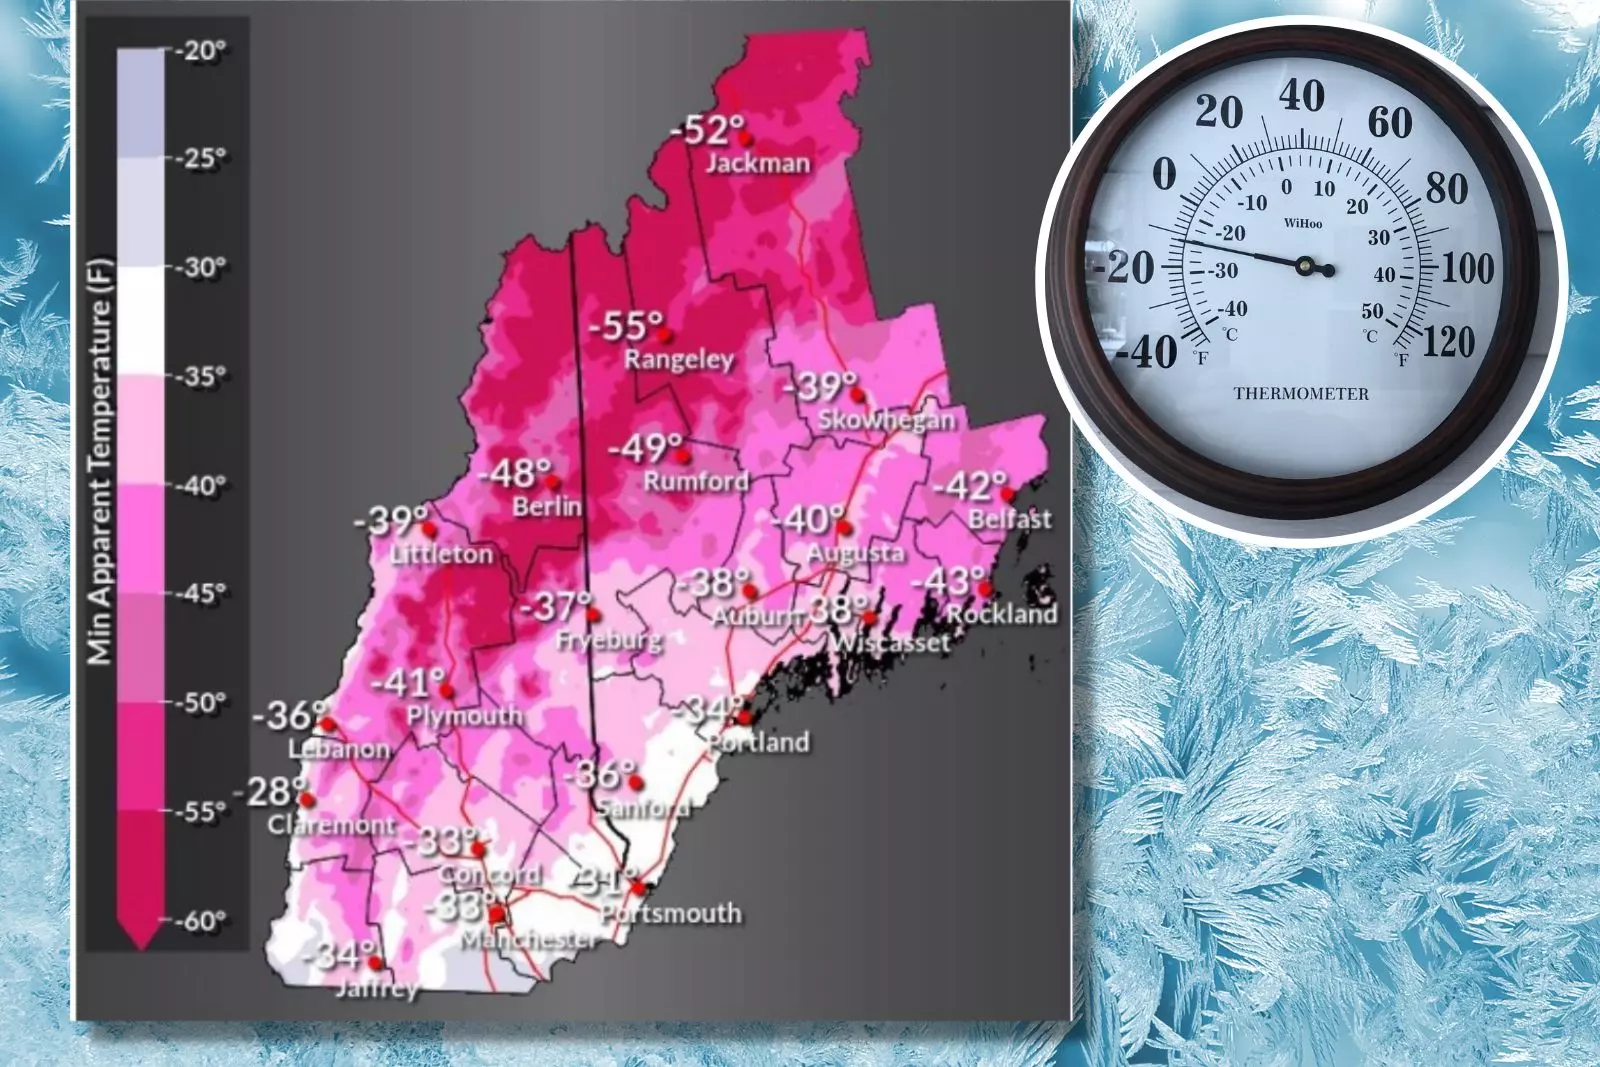 How Low Did the Wind Chill Go in New Hampshire, Maine?